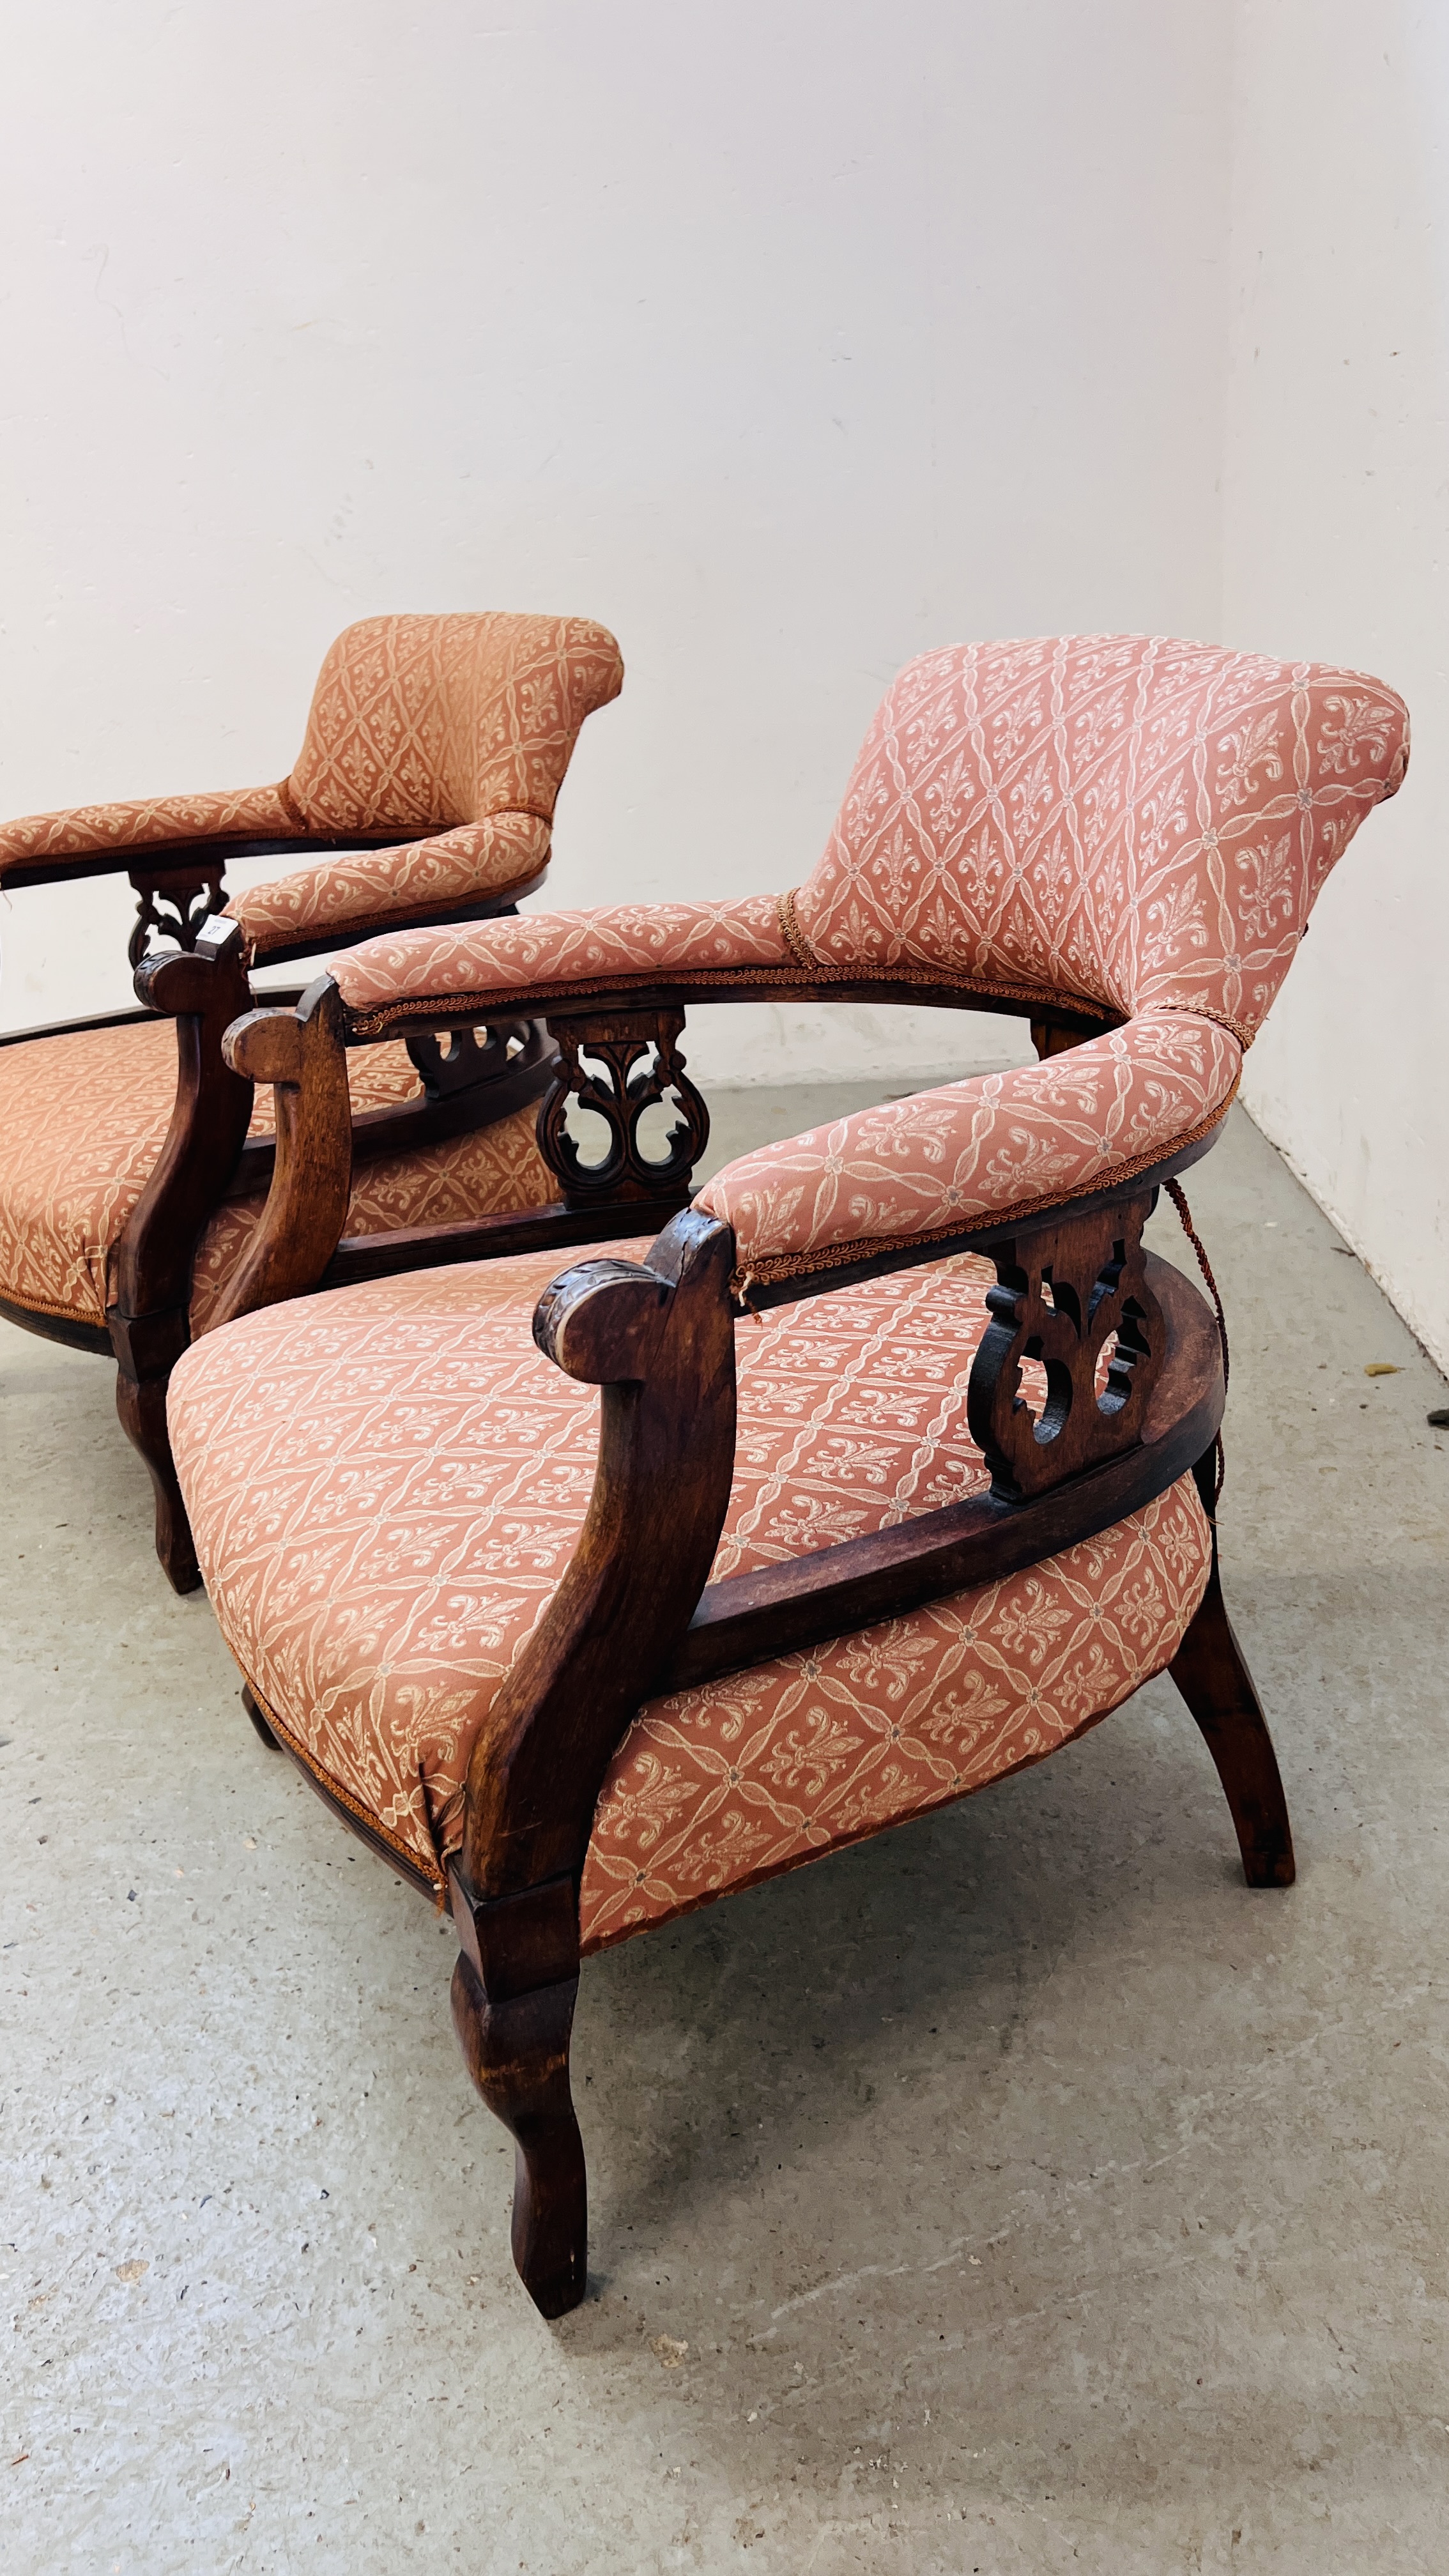 A PAIR OF MAHOGANY FRAMED TUB CHAIRS. - Image 10 of 10